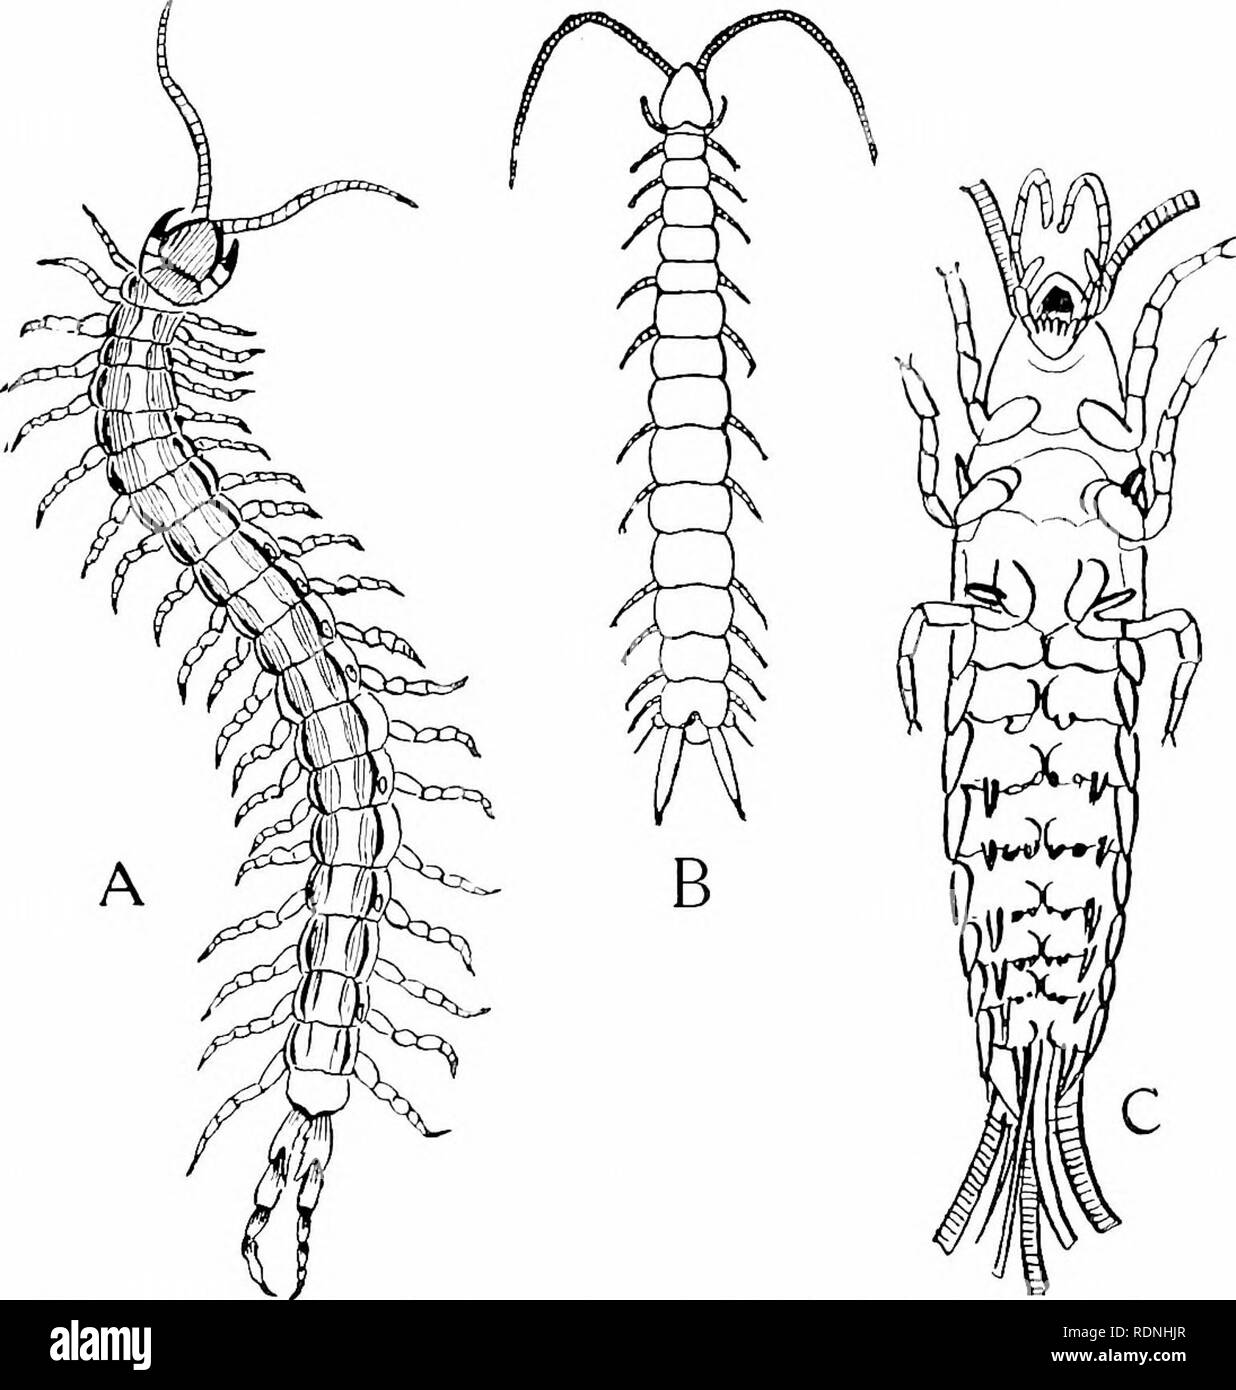 Animal life. Zoology. CENTIPEDE AND INSECT 39 the carriage and protection  of the eggs, or, in hermit crabs, for grasping shells. In insects we find a  great variety of modes of